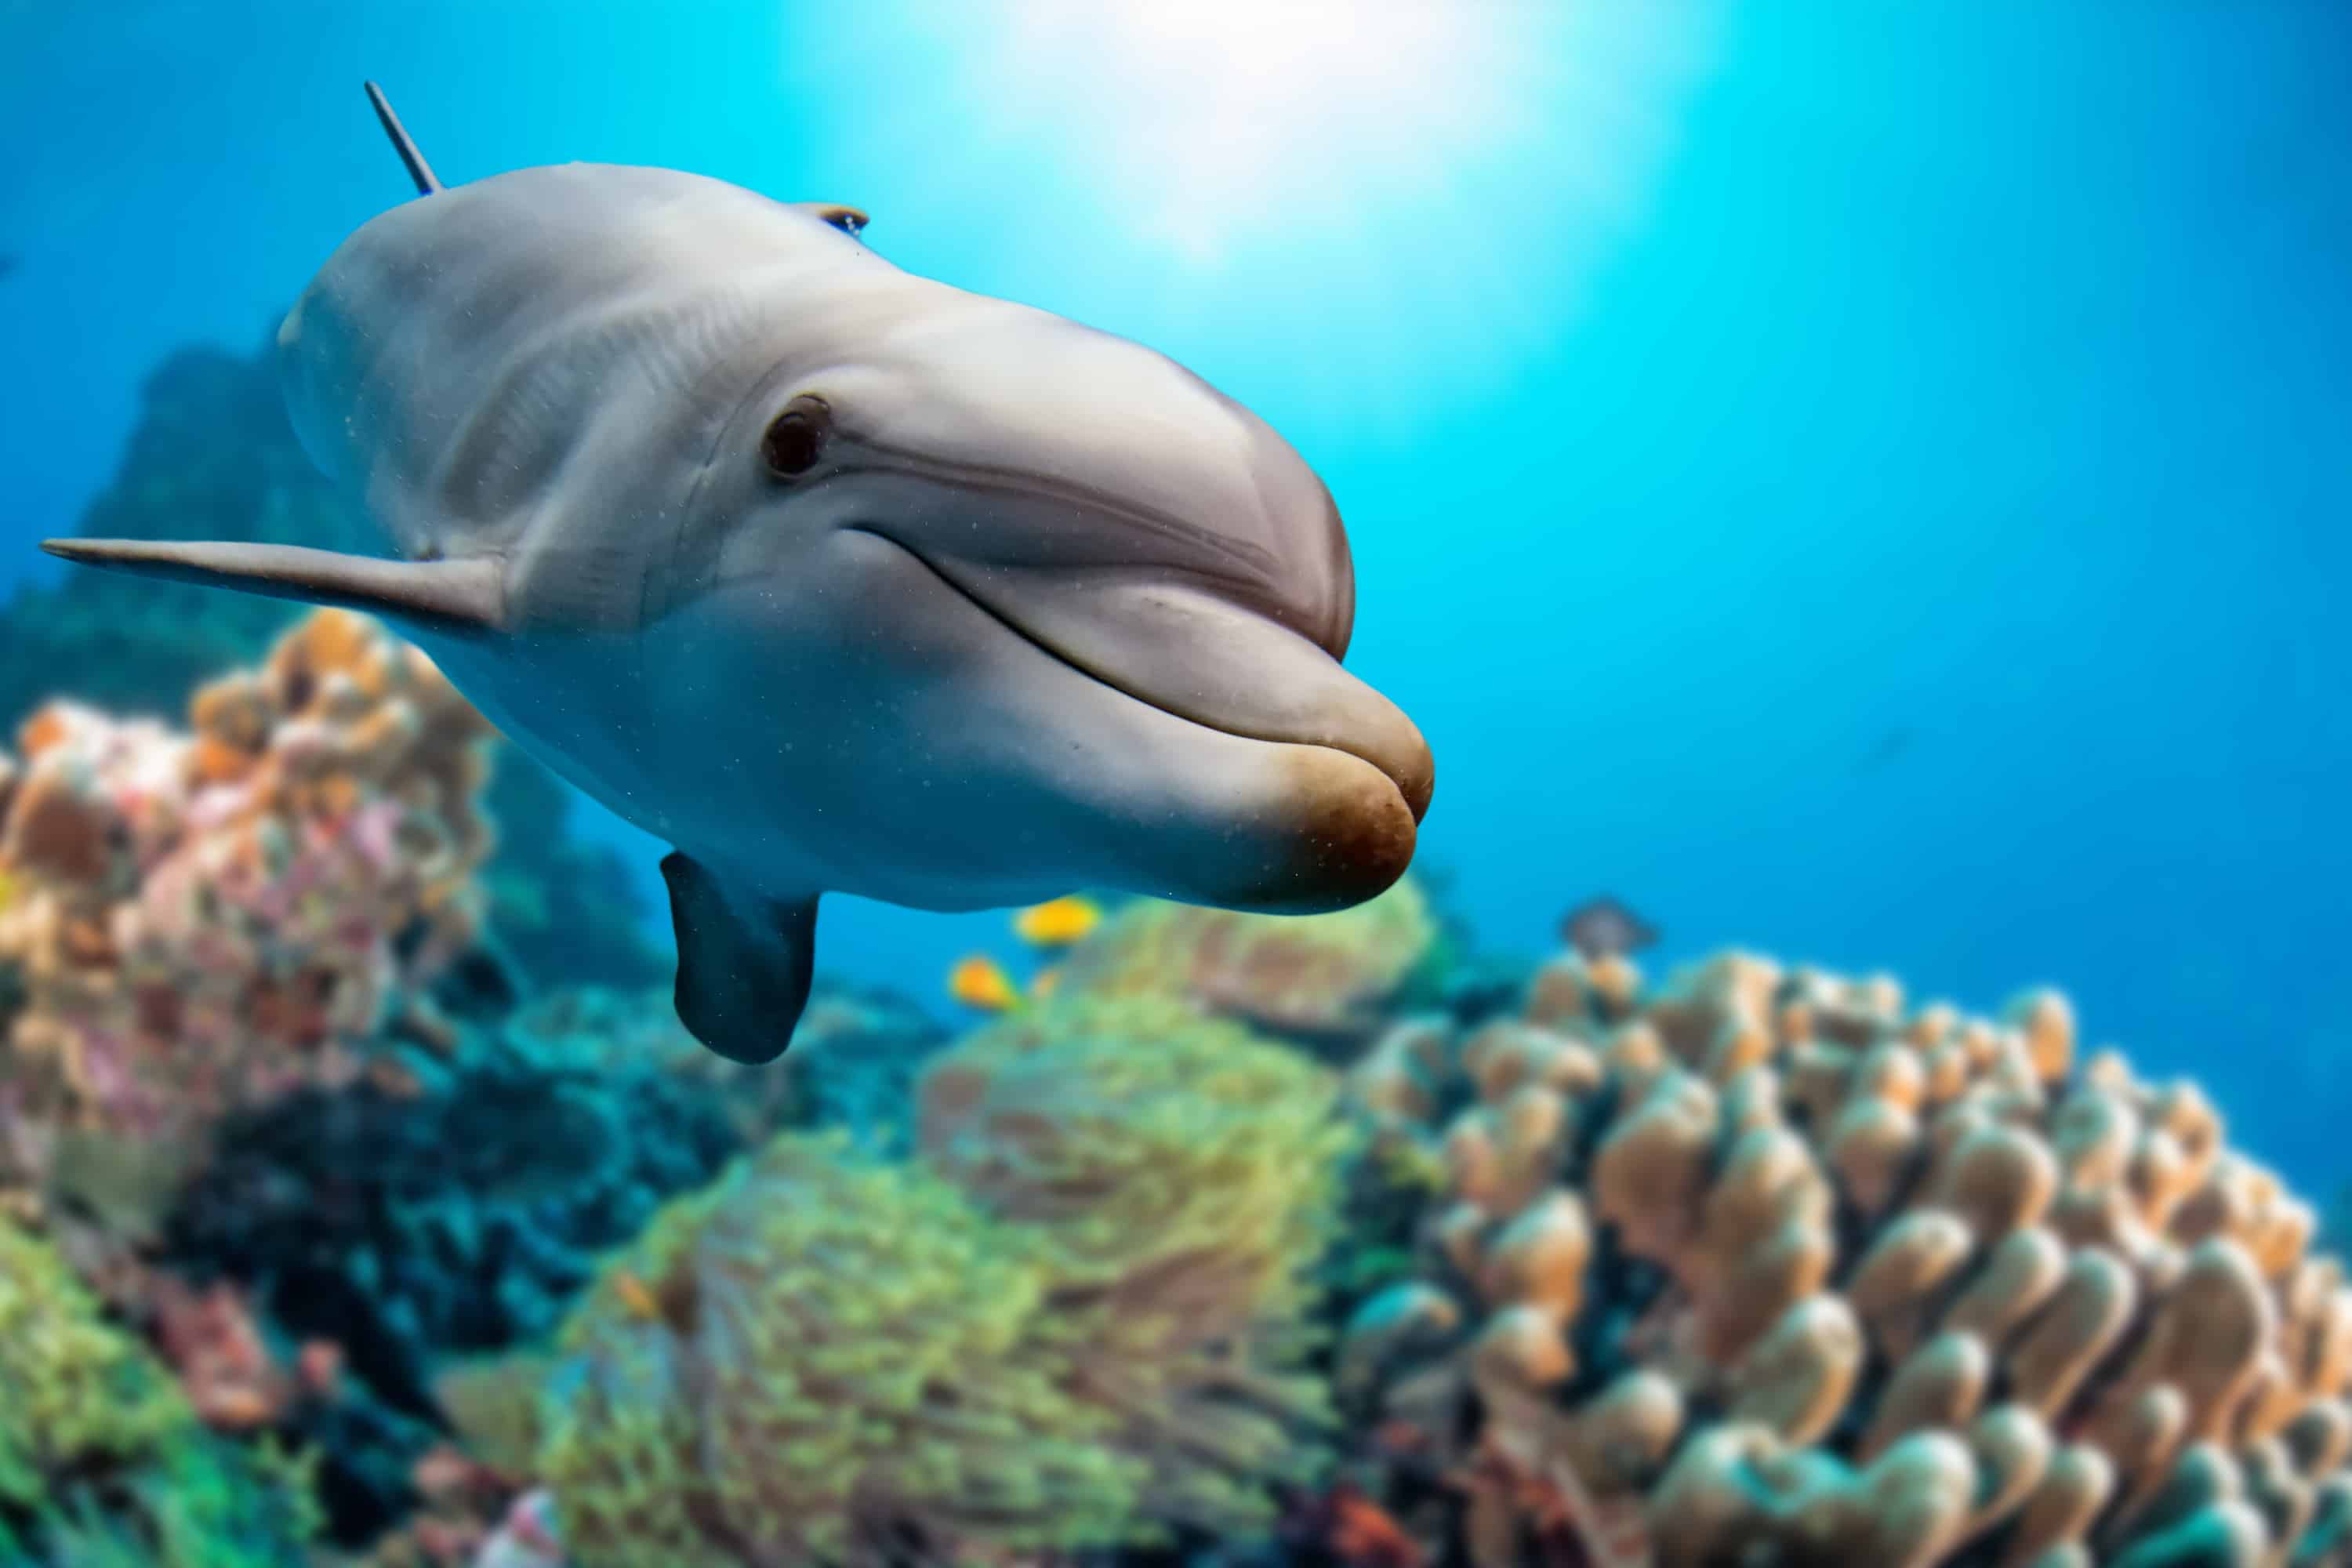 How fast do dolphins swim - Fun Facts About Dolphins For Kids